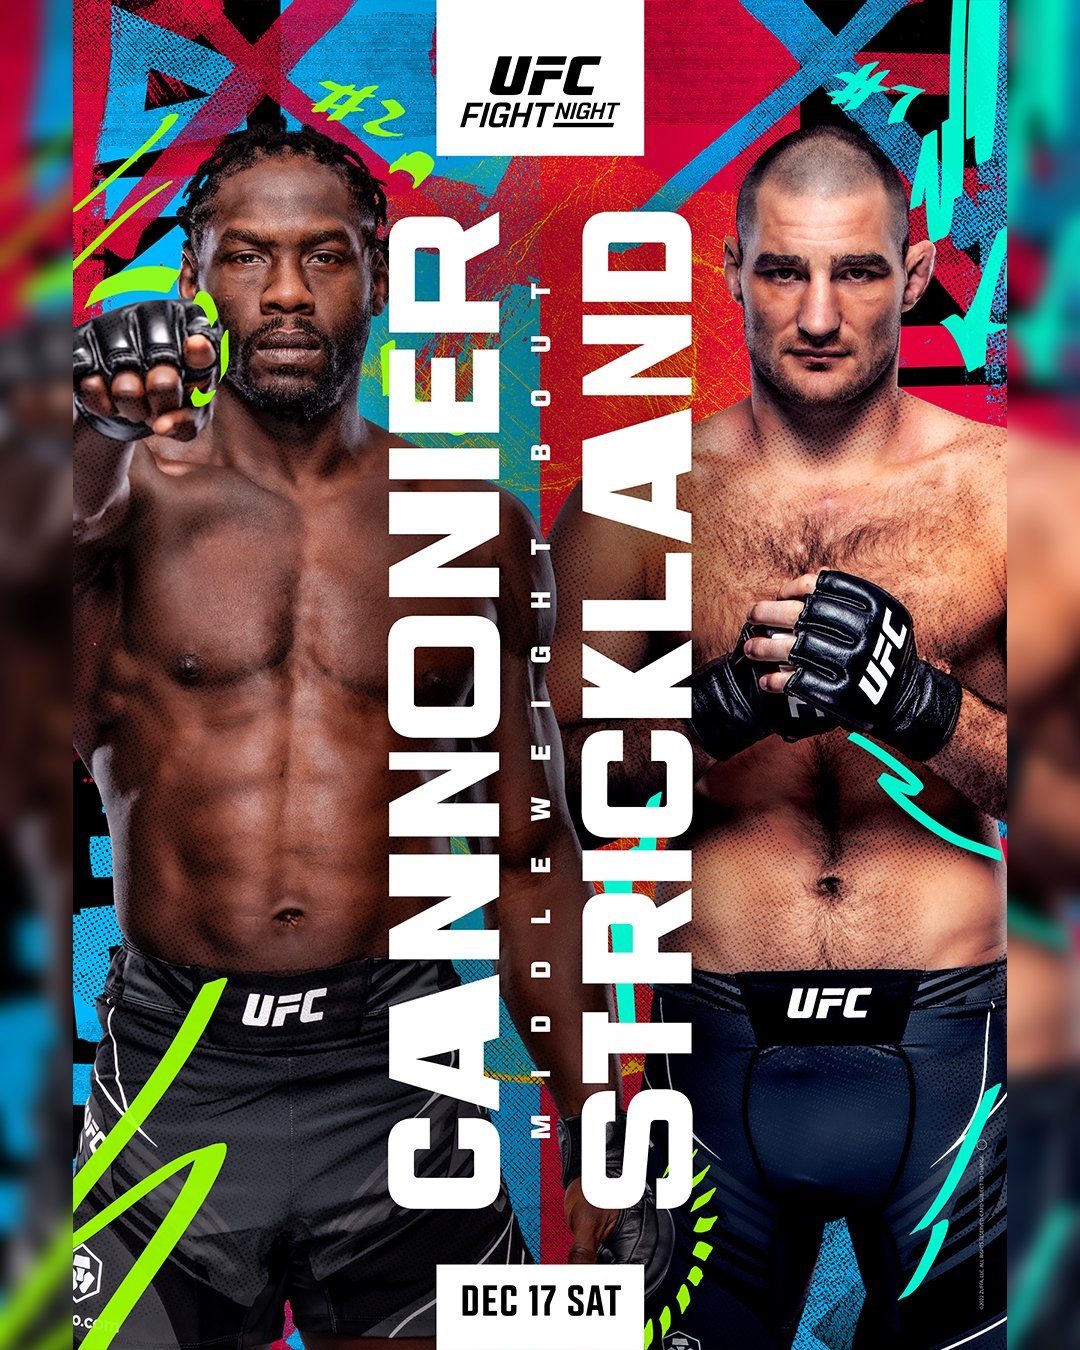 Official UFC Fight Poster for UFC Fight Night: Cannonier v Strickland